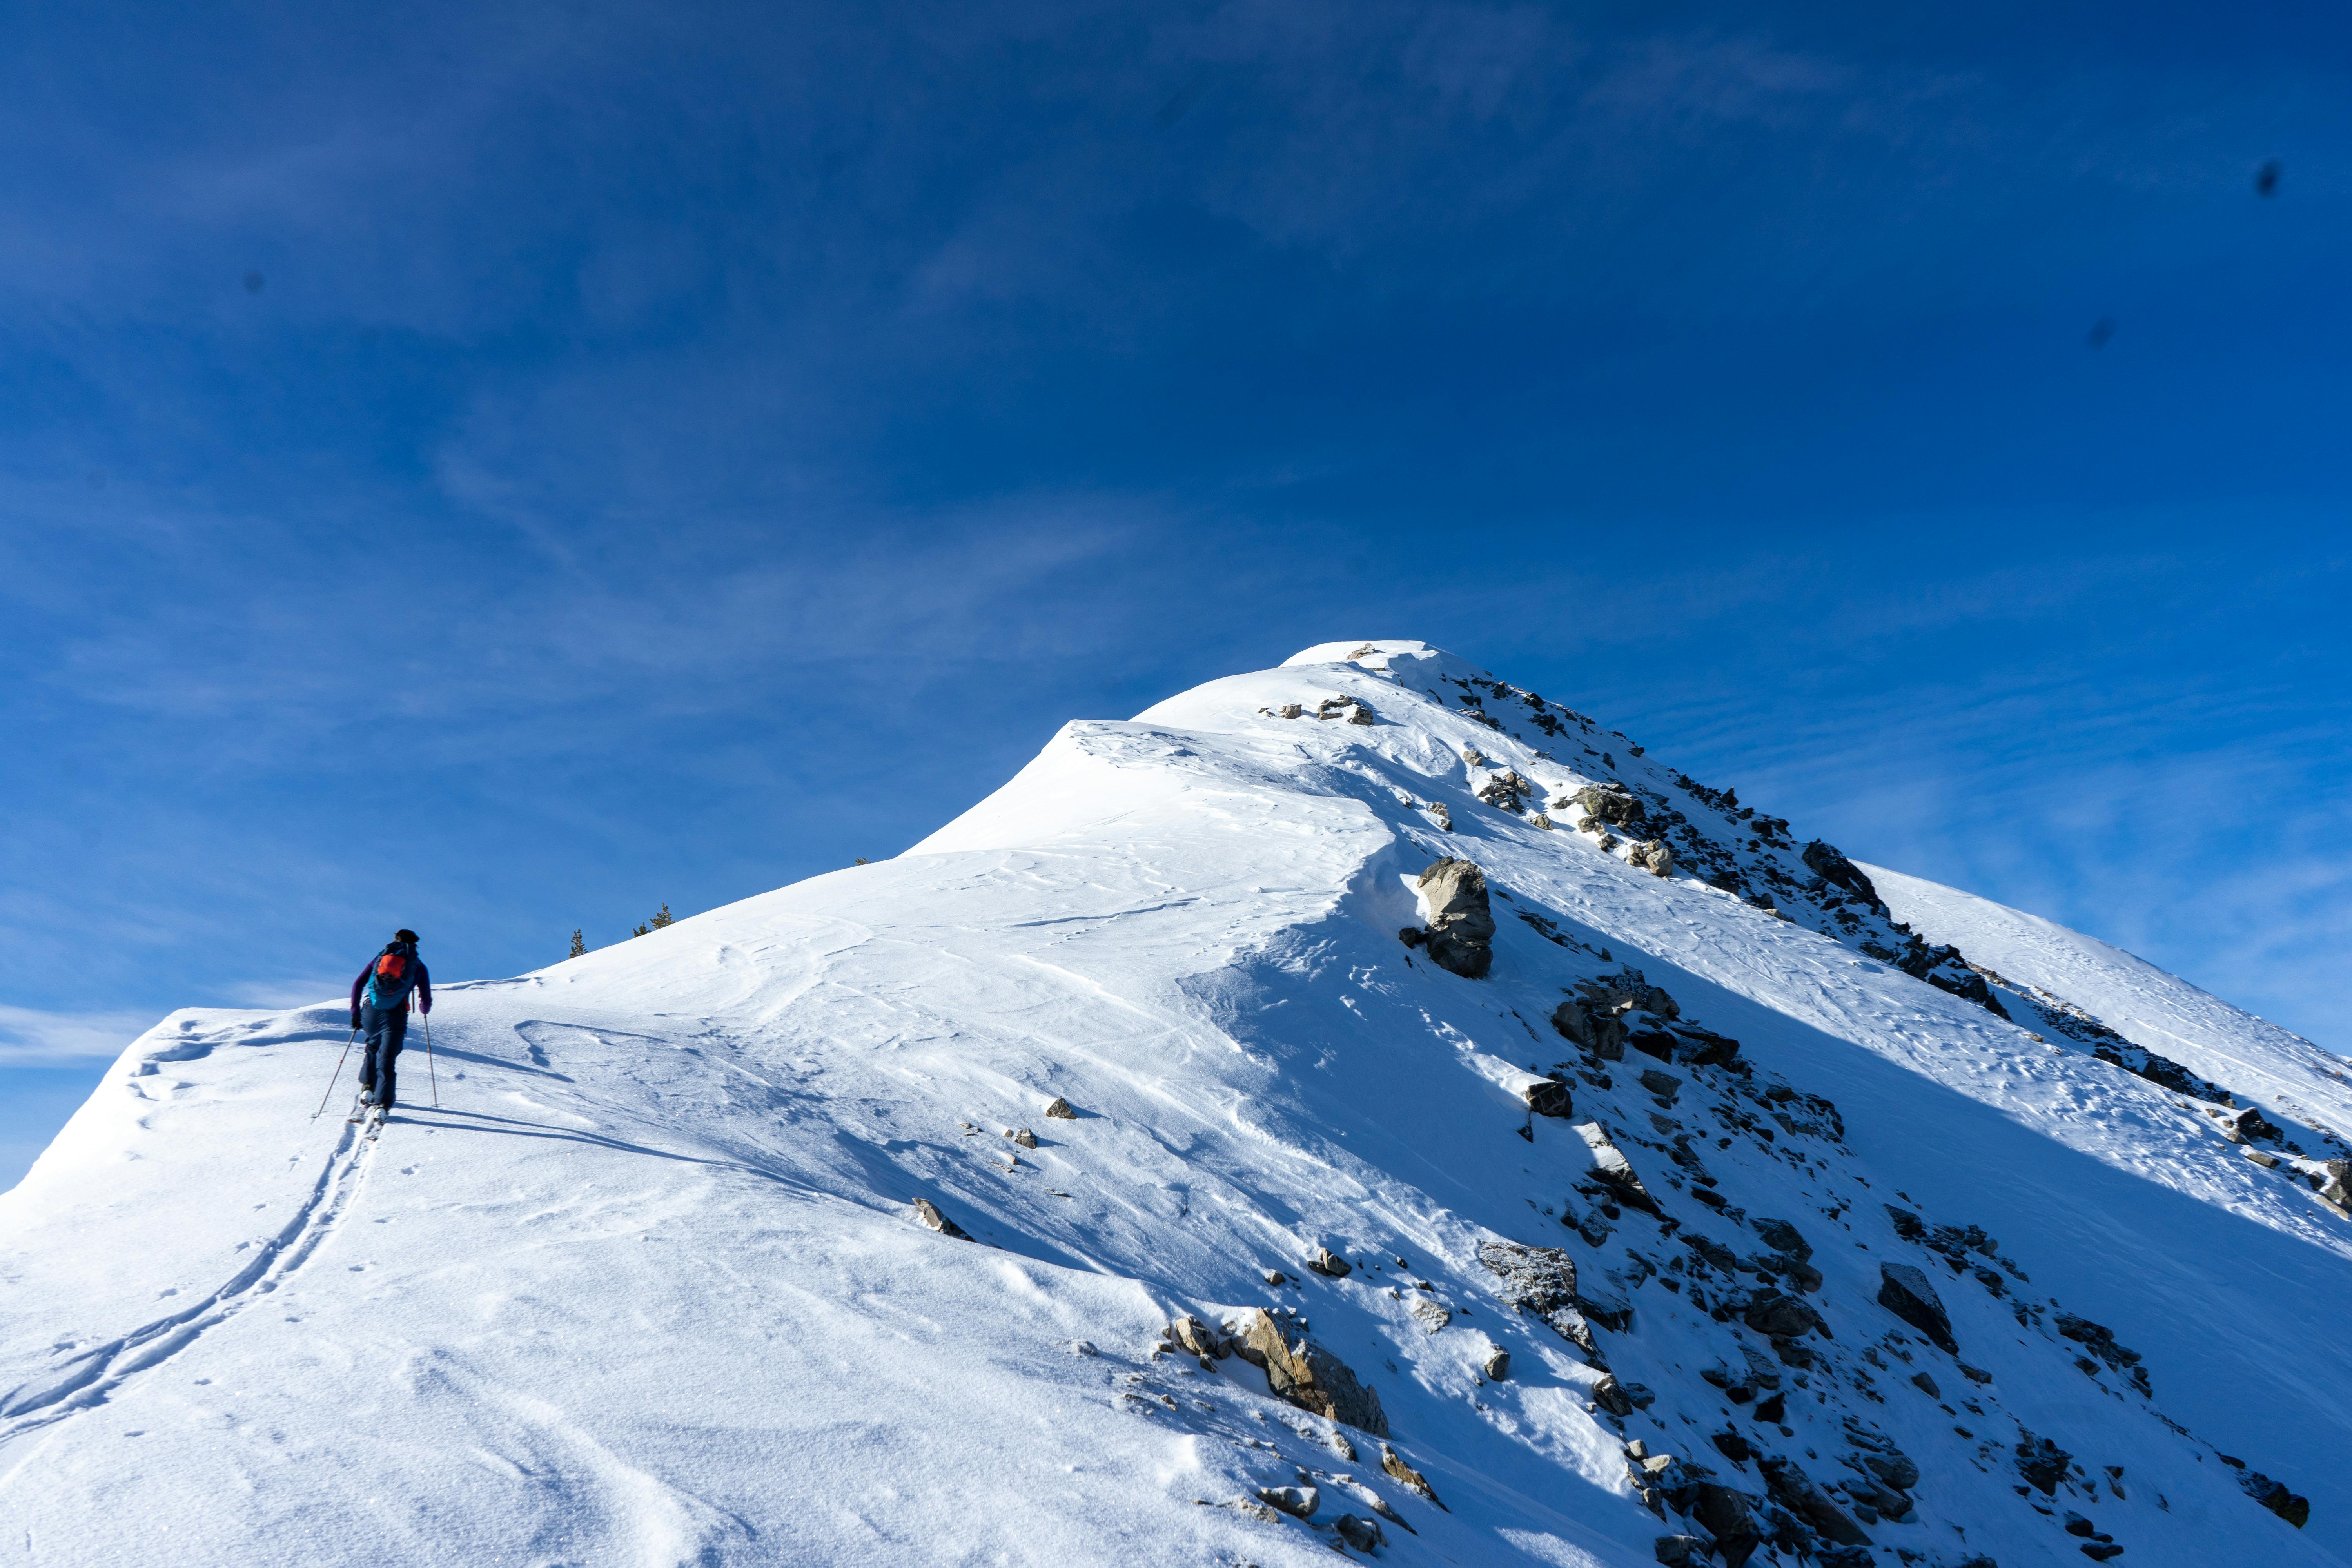 A skier ascends a mountain to ski. He is almost at the top and the sky is very blue. There is a lot of snow and a lot of rocks.